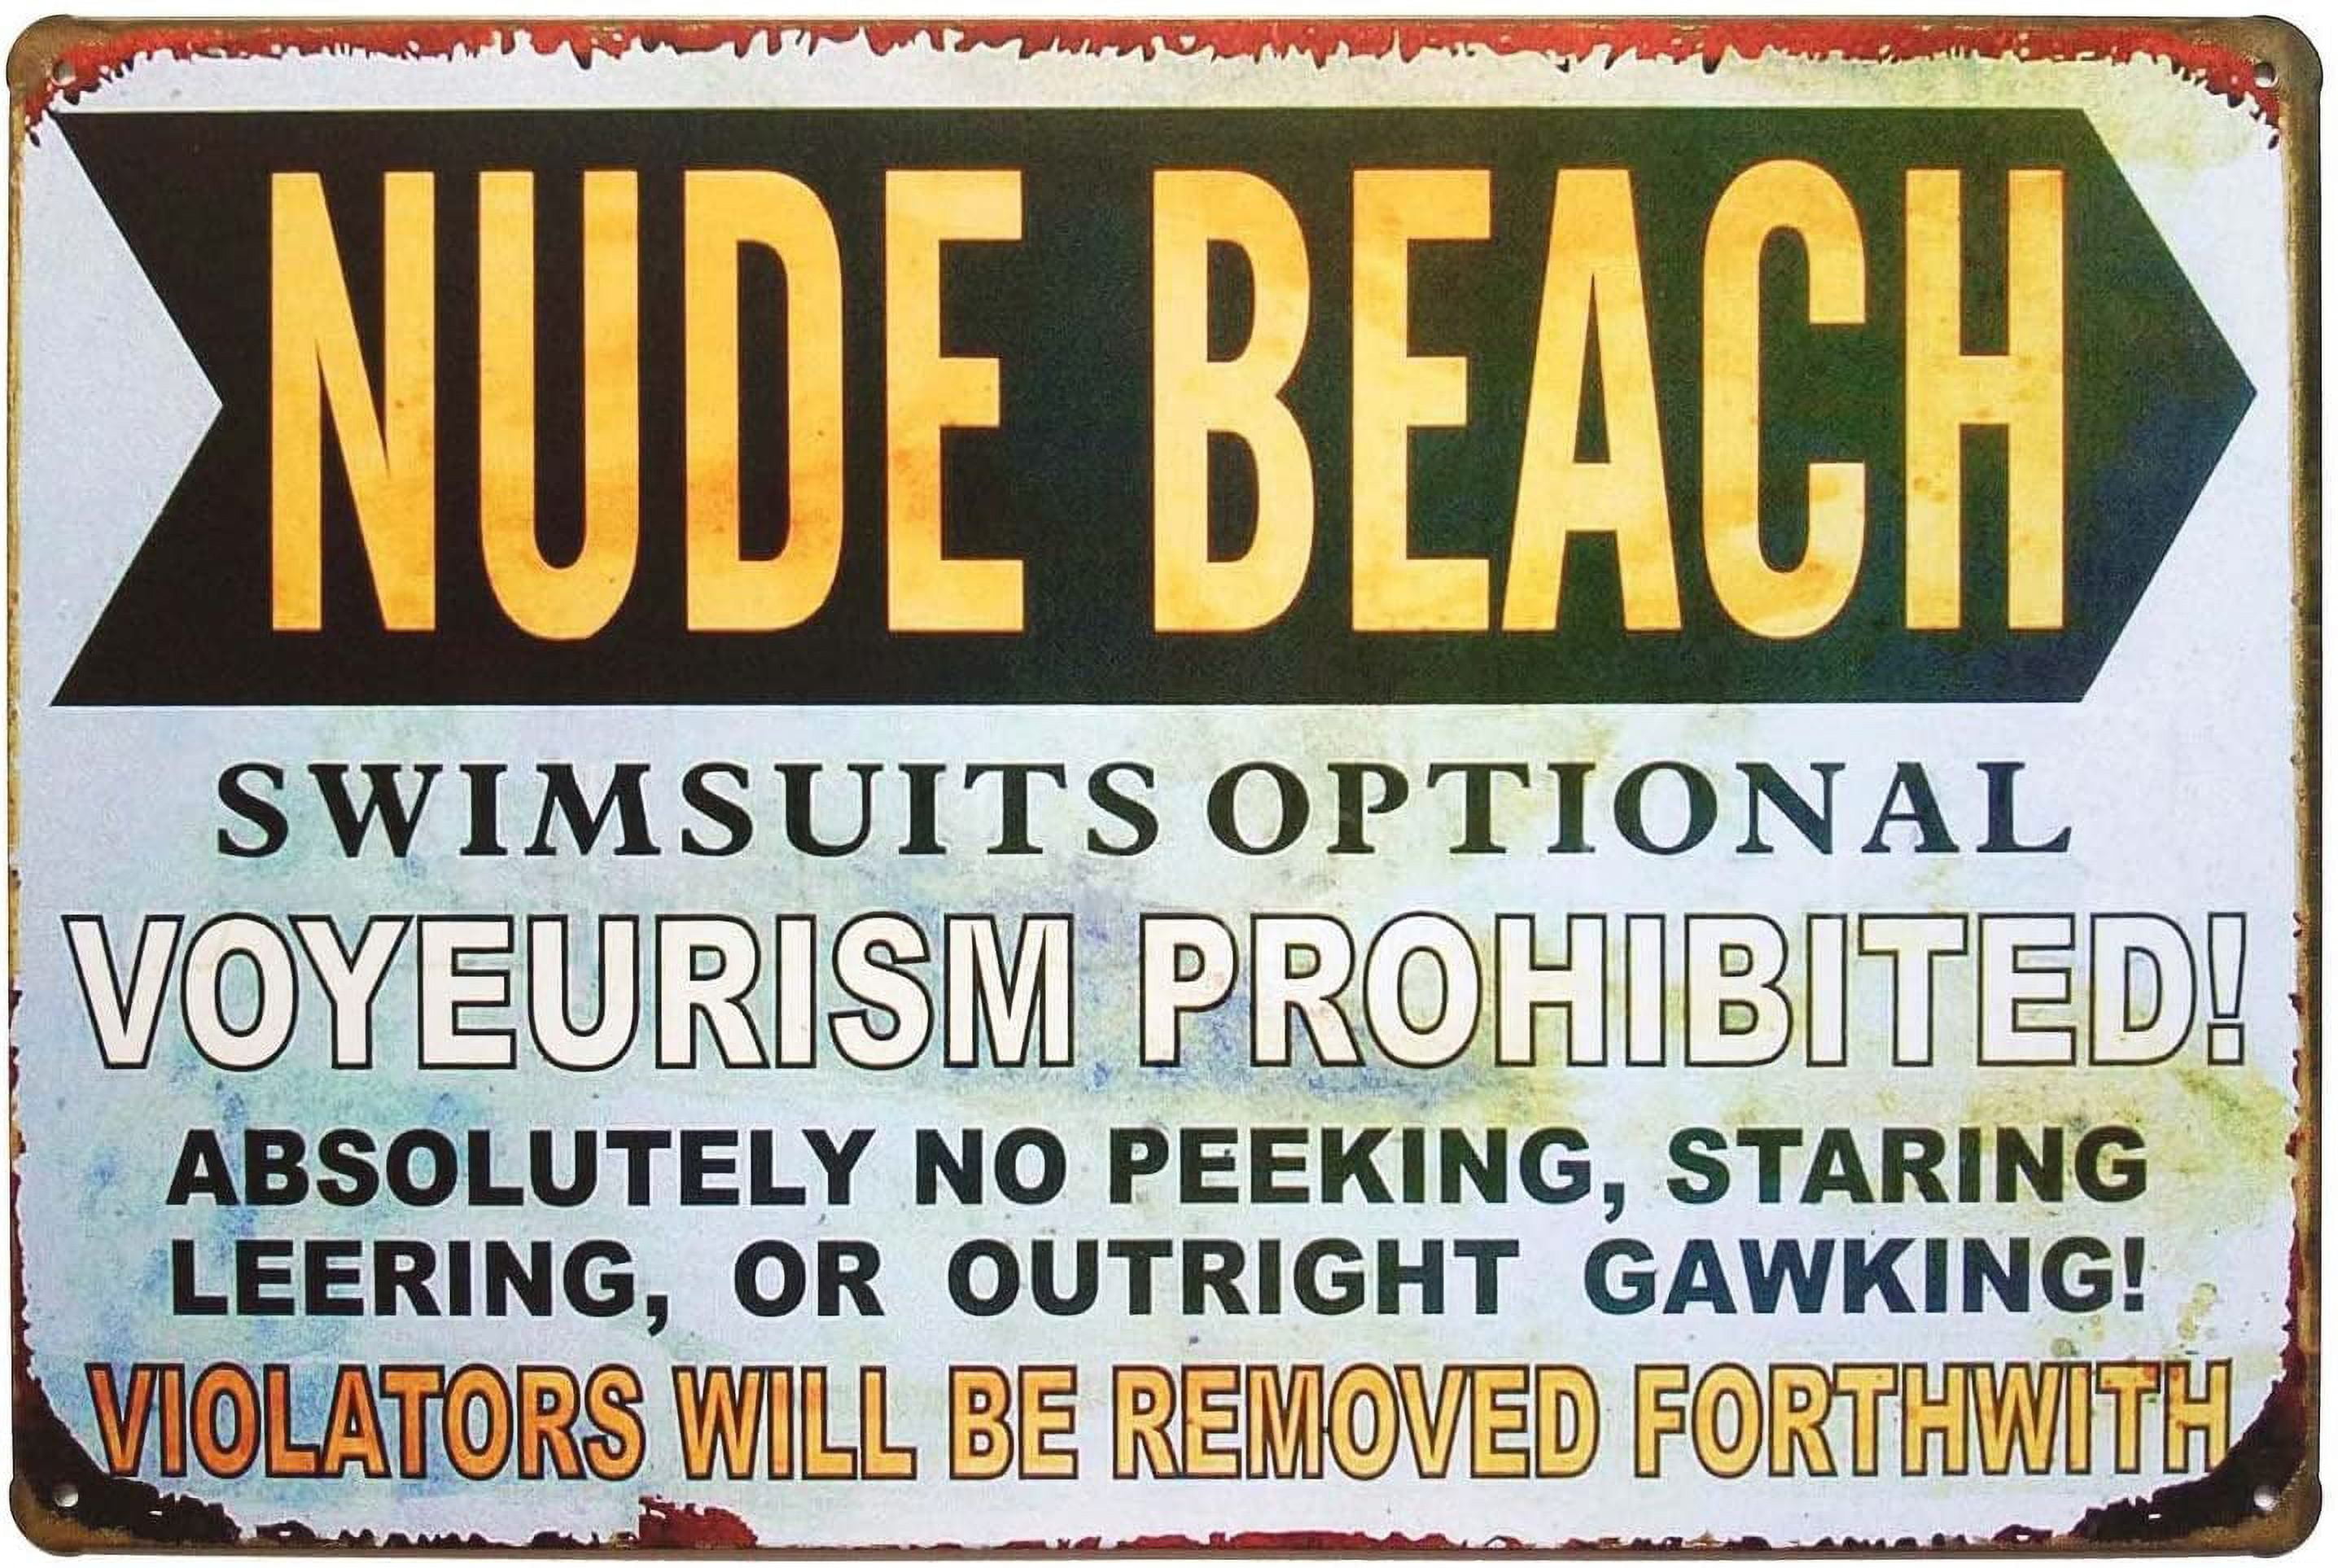 Nude Beach Swimsuits Optional Voyeurism Prohibited Metal Tin Sign Vintage Plaque Home Wall Decor, 8x12 Inches